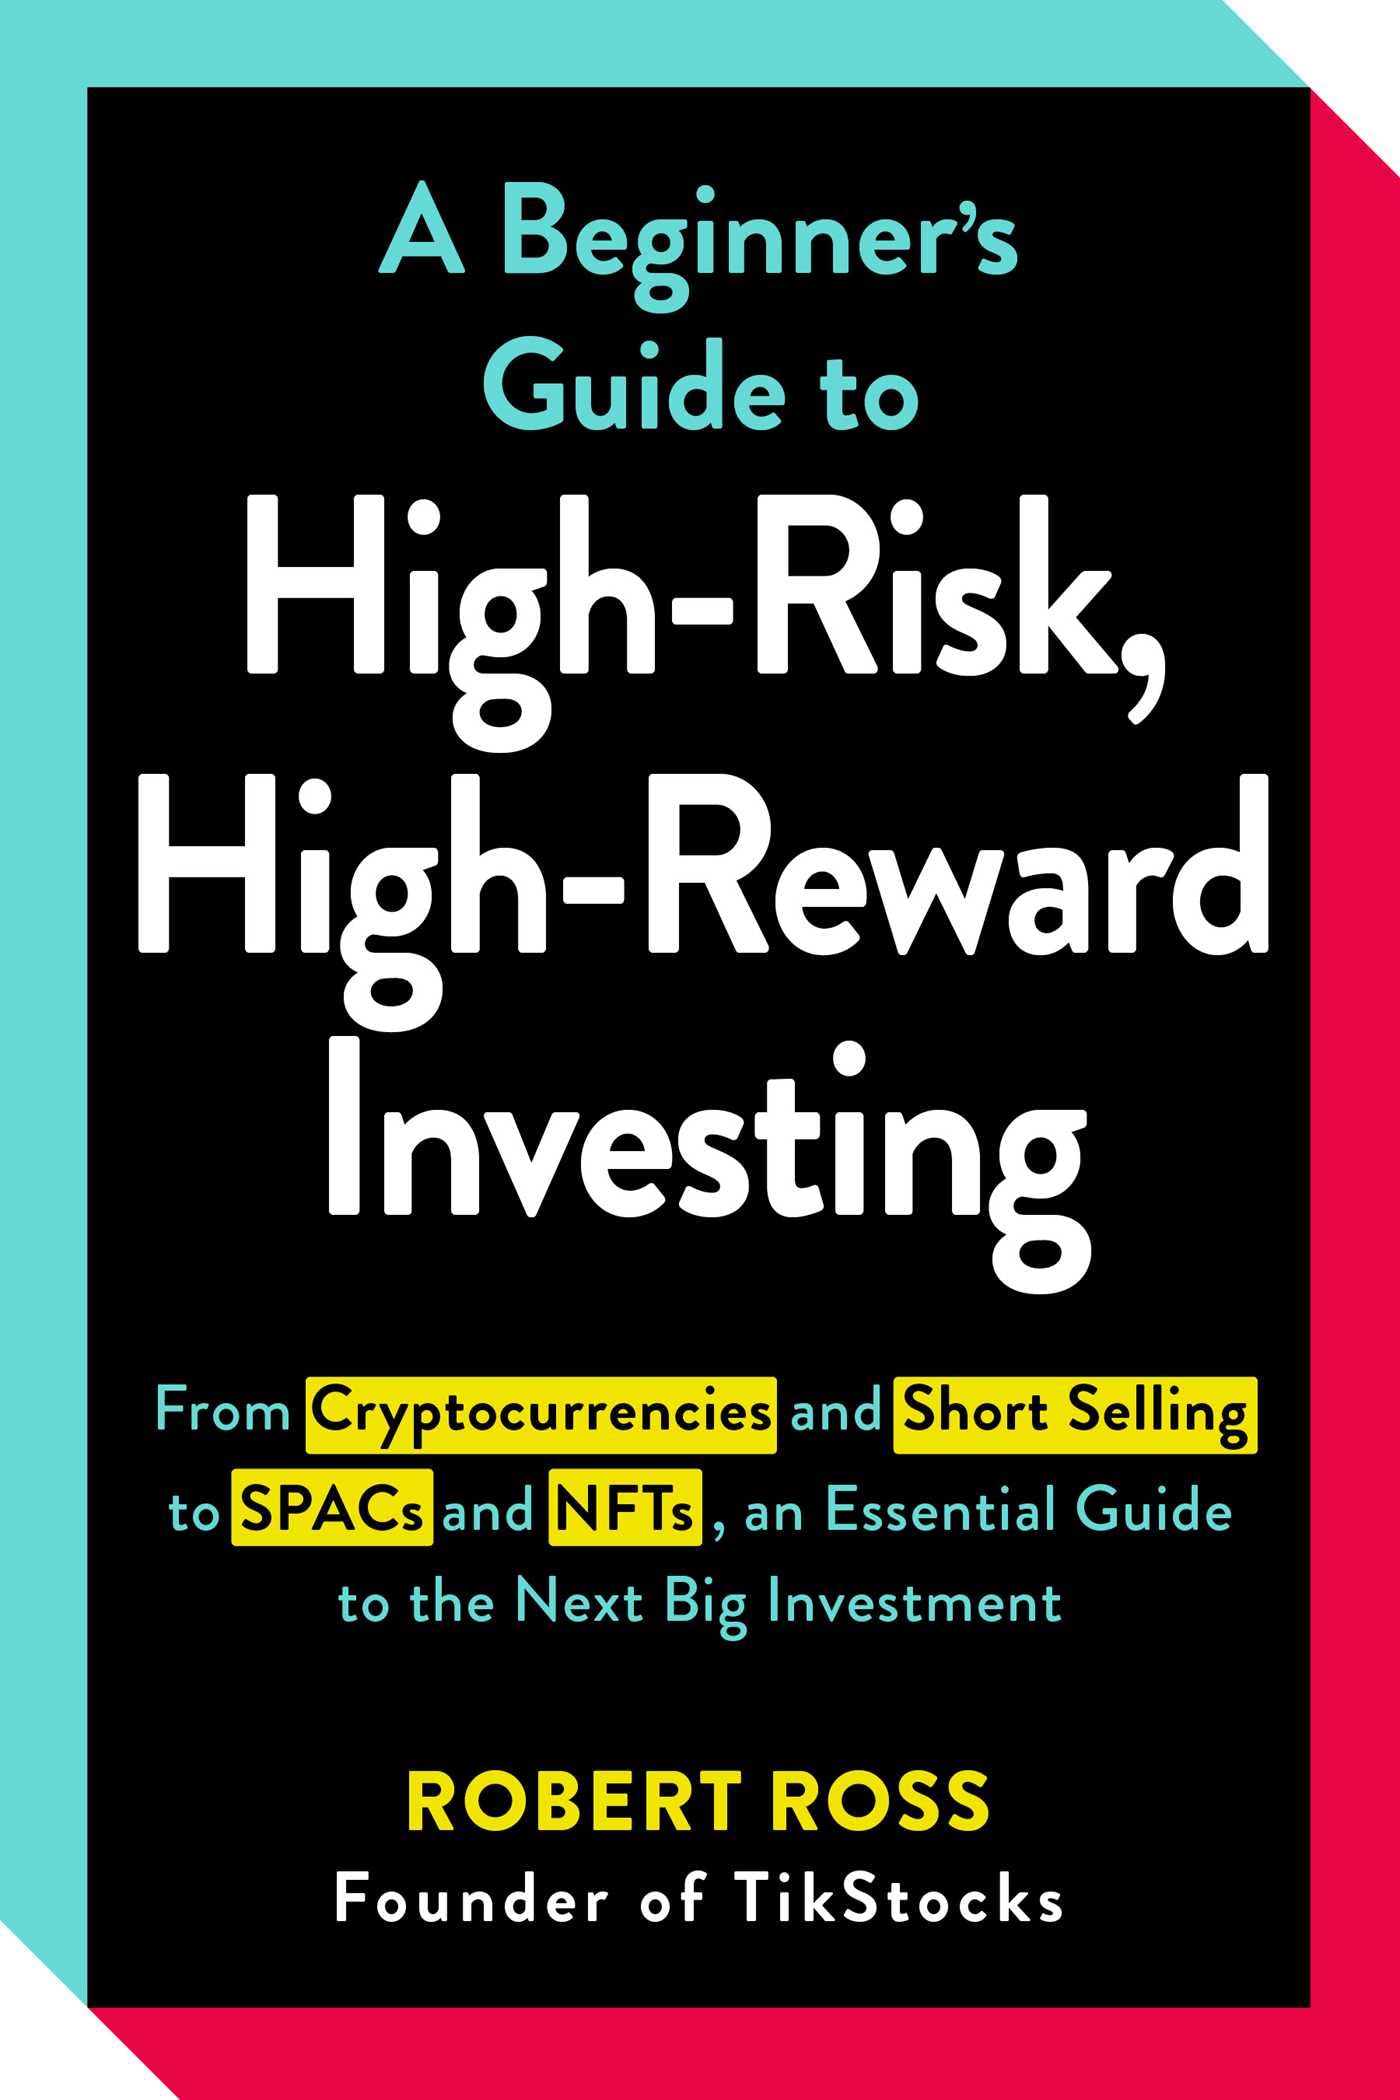 A Beginner's Guide to High-Risk, High-Reward Investing: From Cryptocurrencies and Short Selling to Spacs and Nfts, an Essential Guide to the Next Big In - SureShot Books Publishing LLC